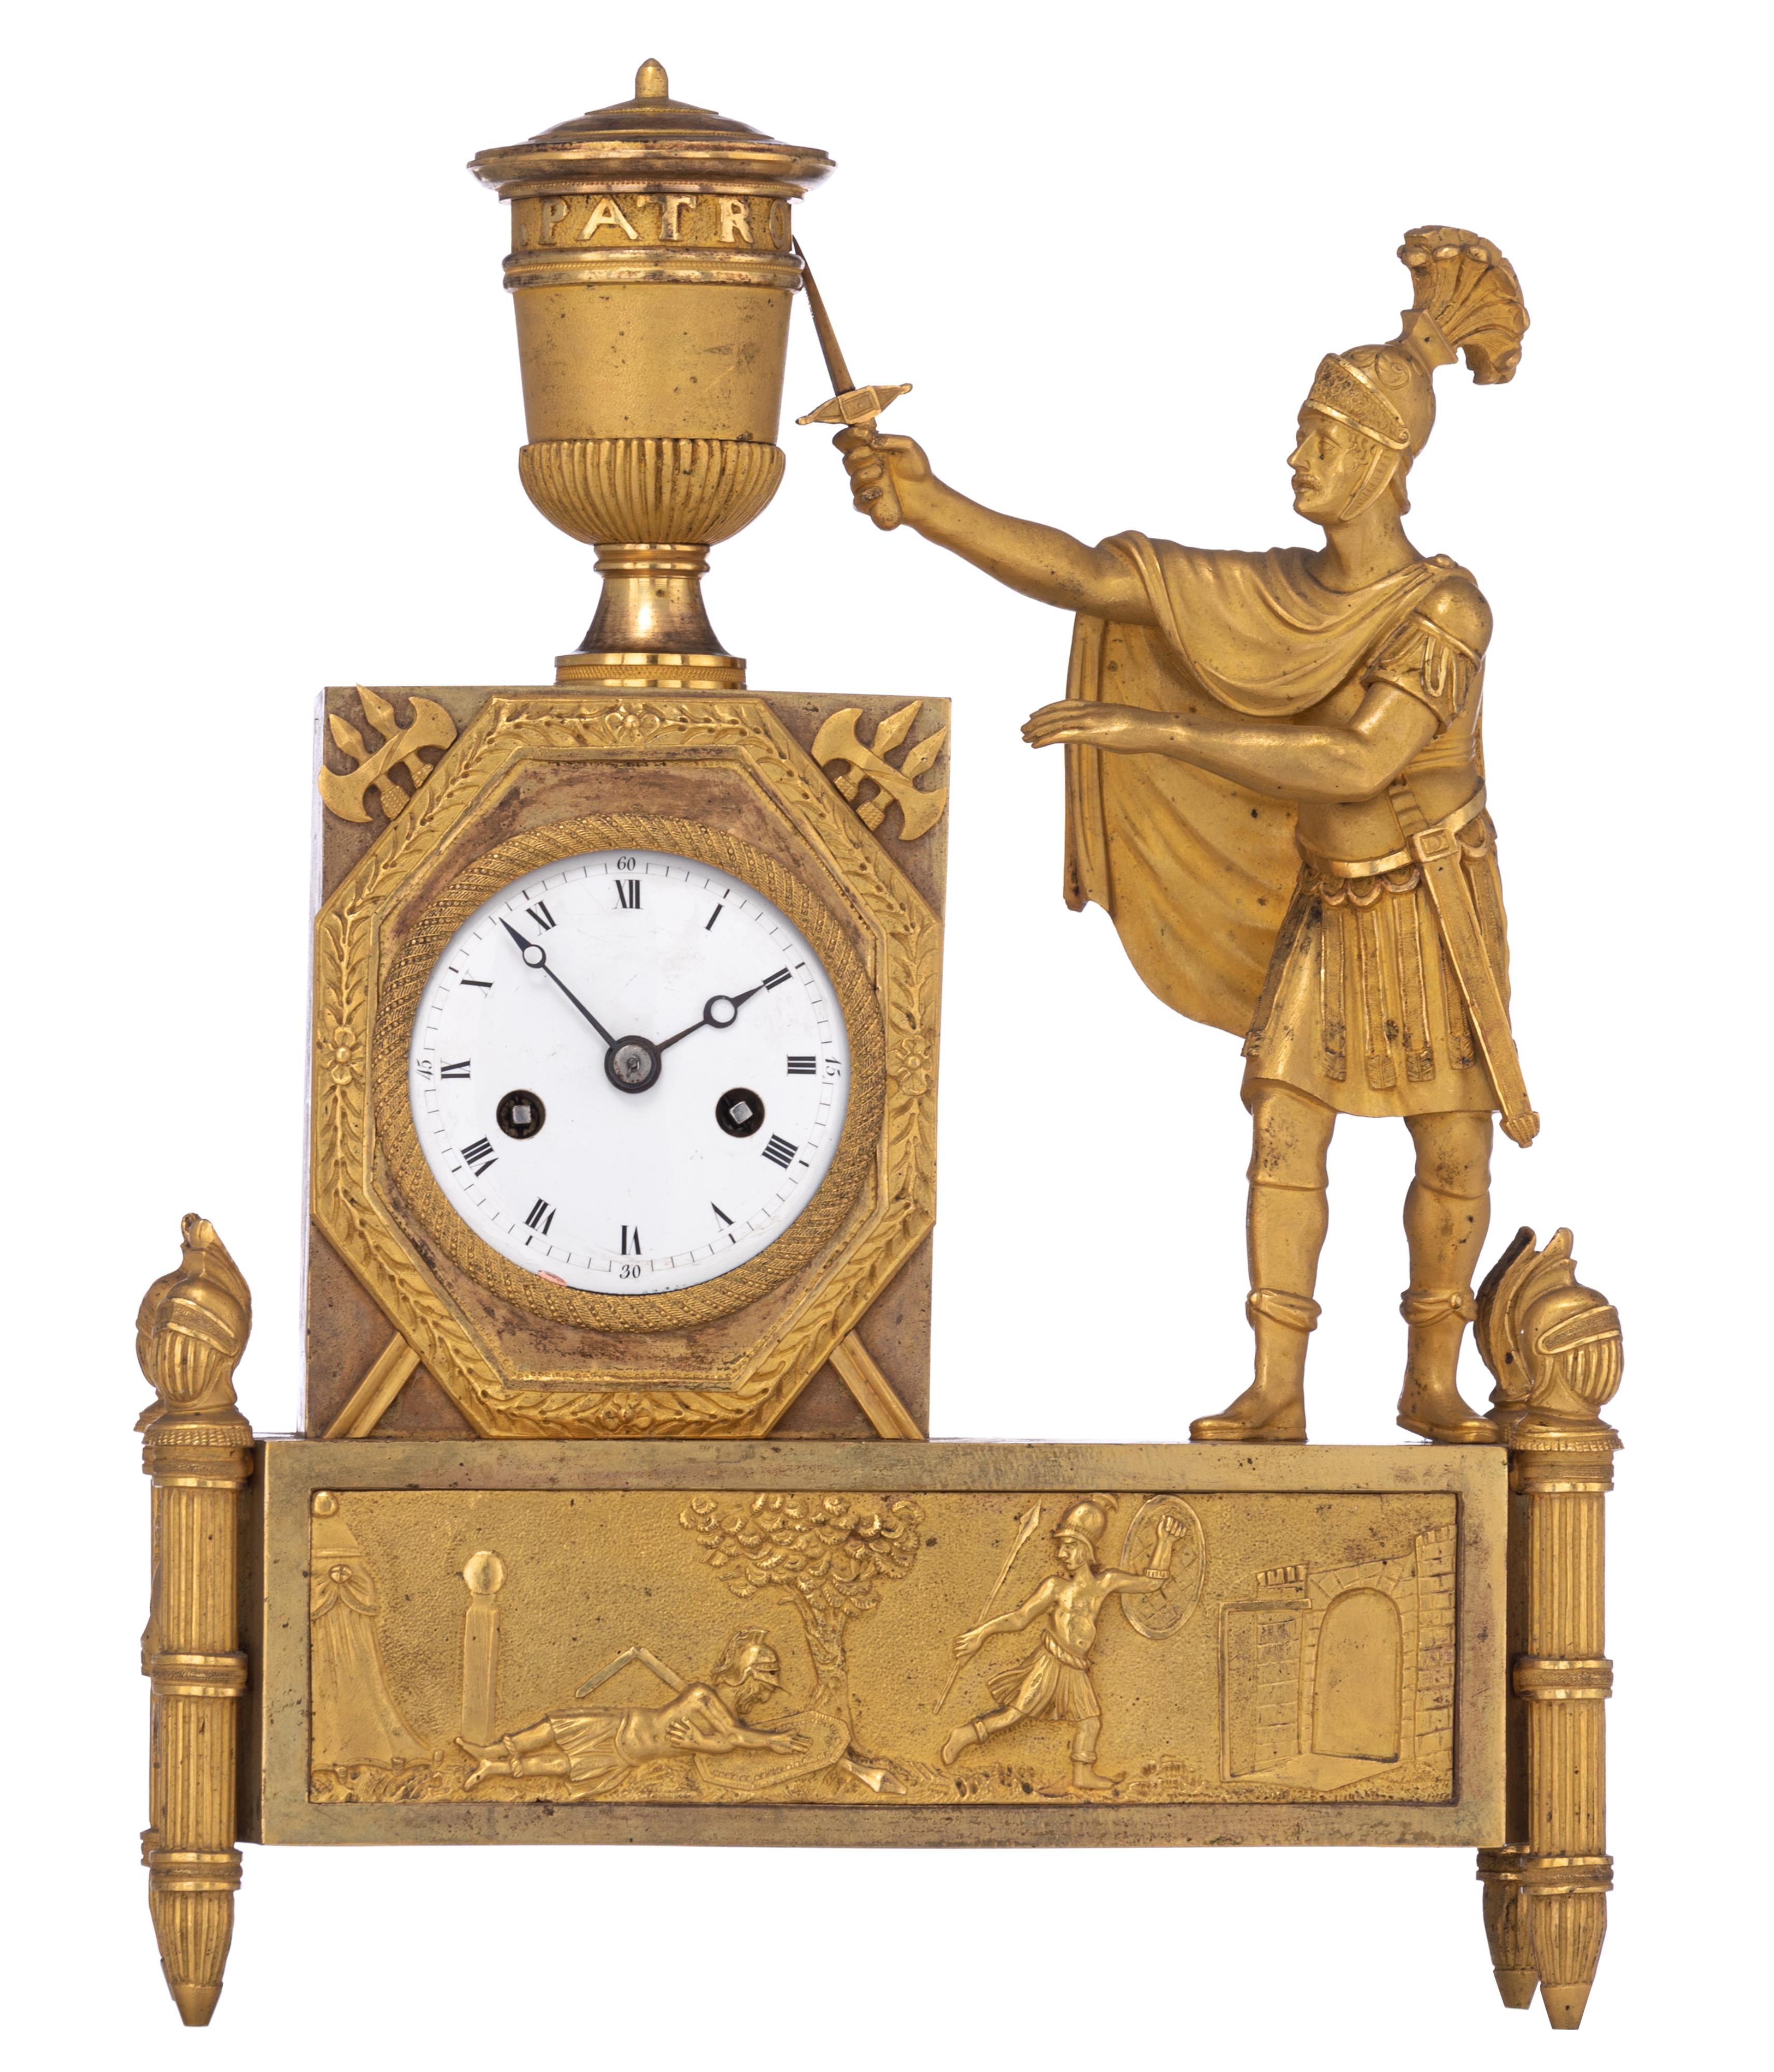 A French Restauration mantle clock, depicting the tragic story of Patroclus, H 33 - W 24,5 cm